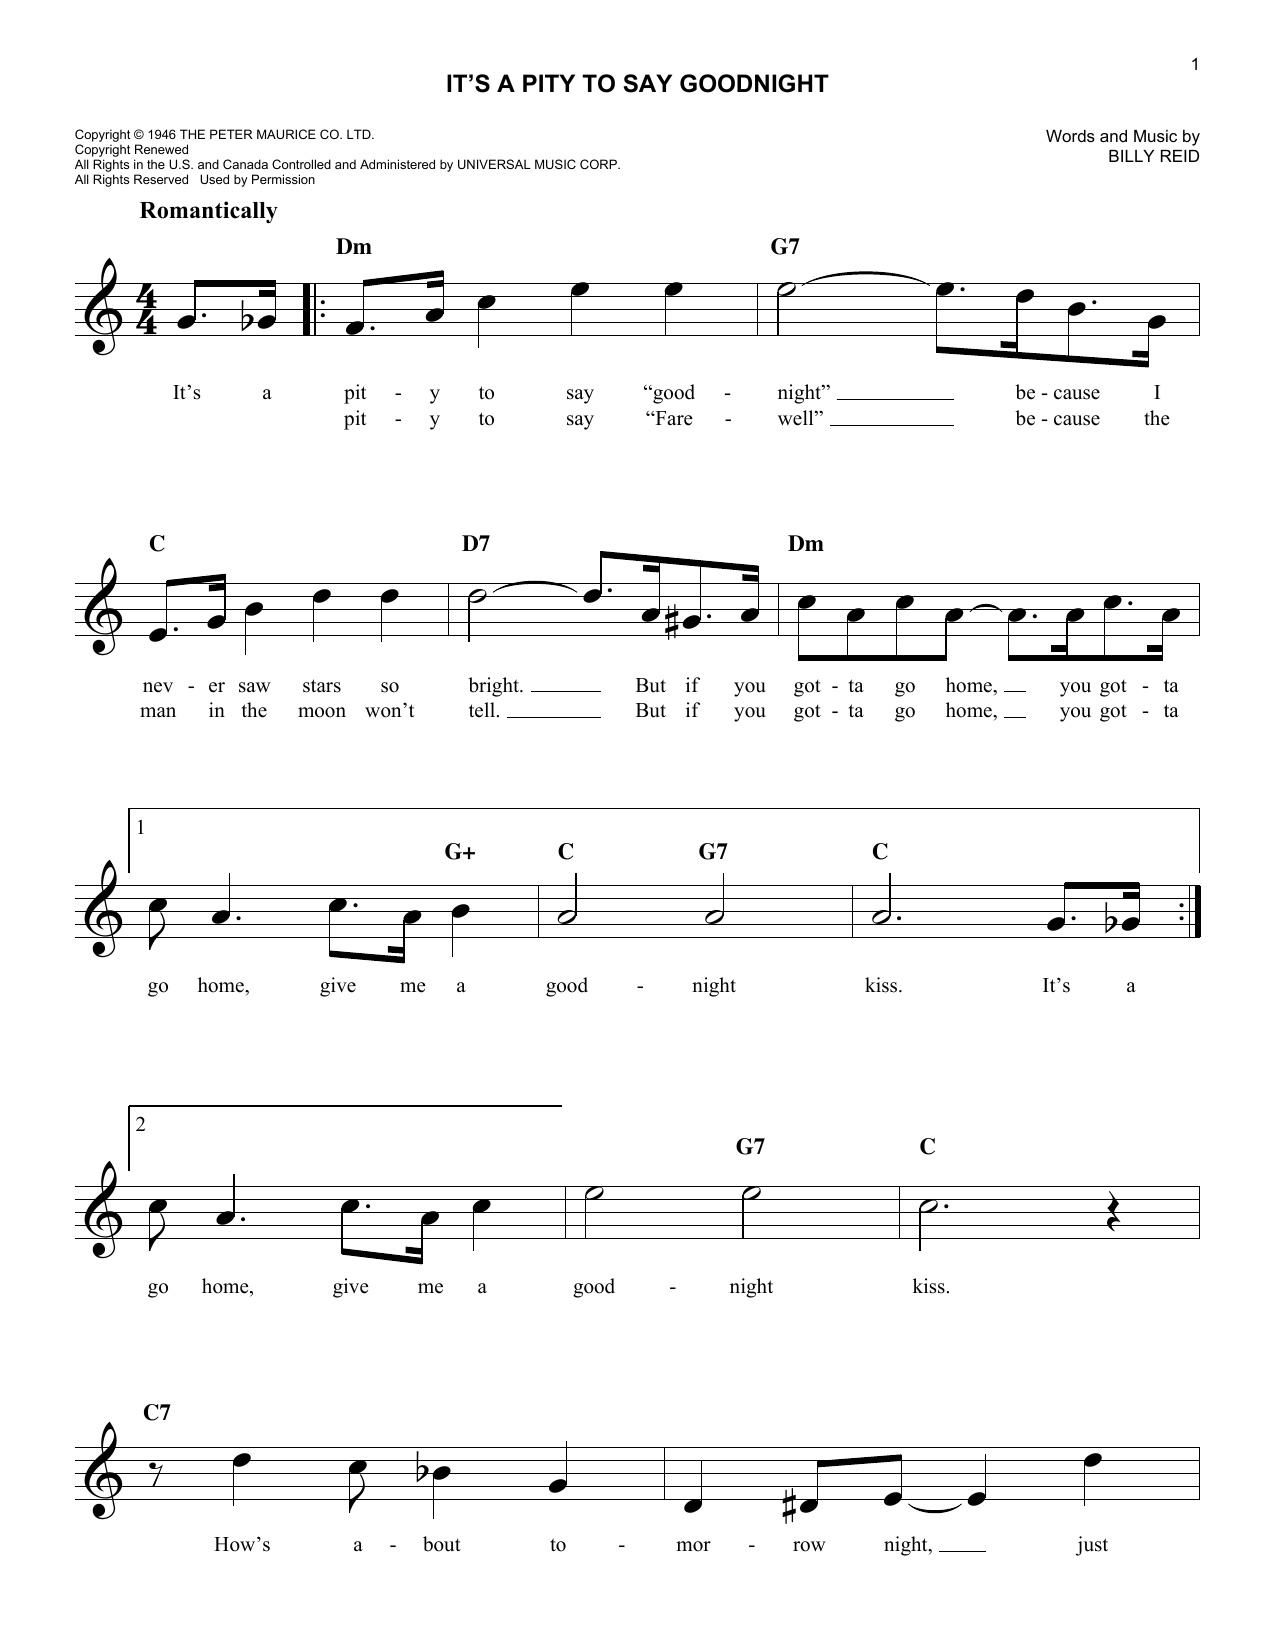 Ella Fitzgerald It's A Pity To Say Goodnight sheet music notes and chords. Download Printable PDF.